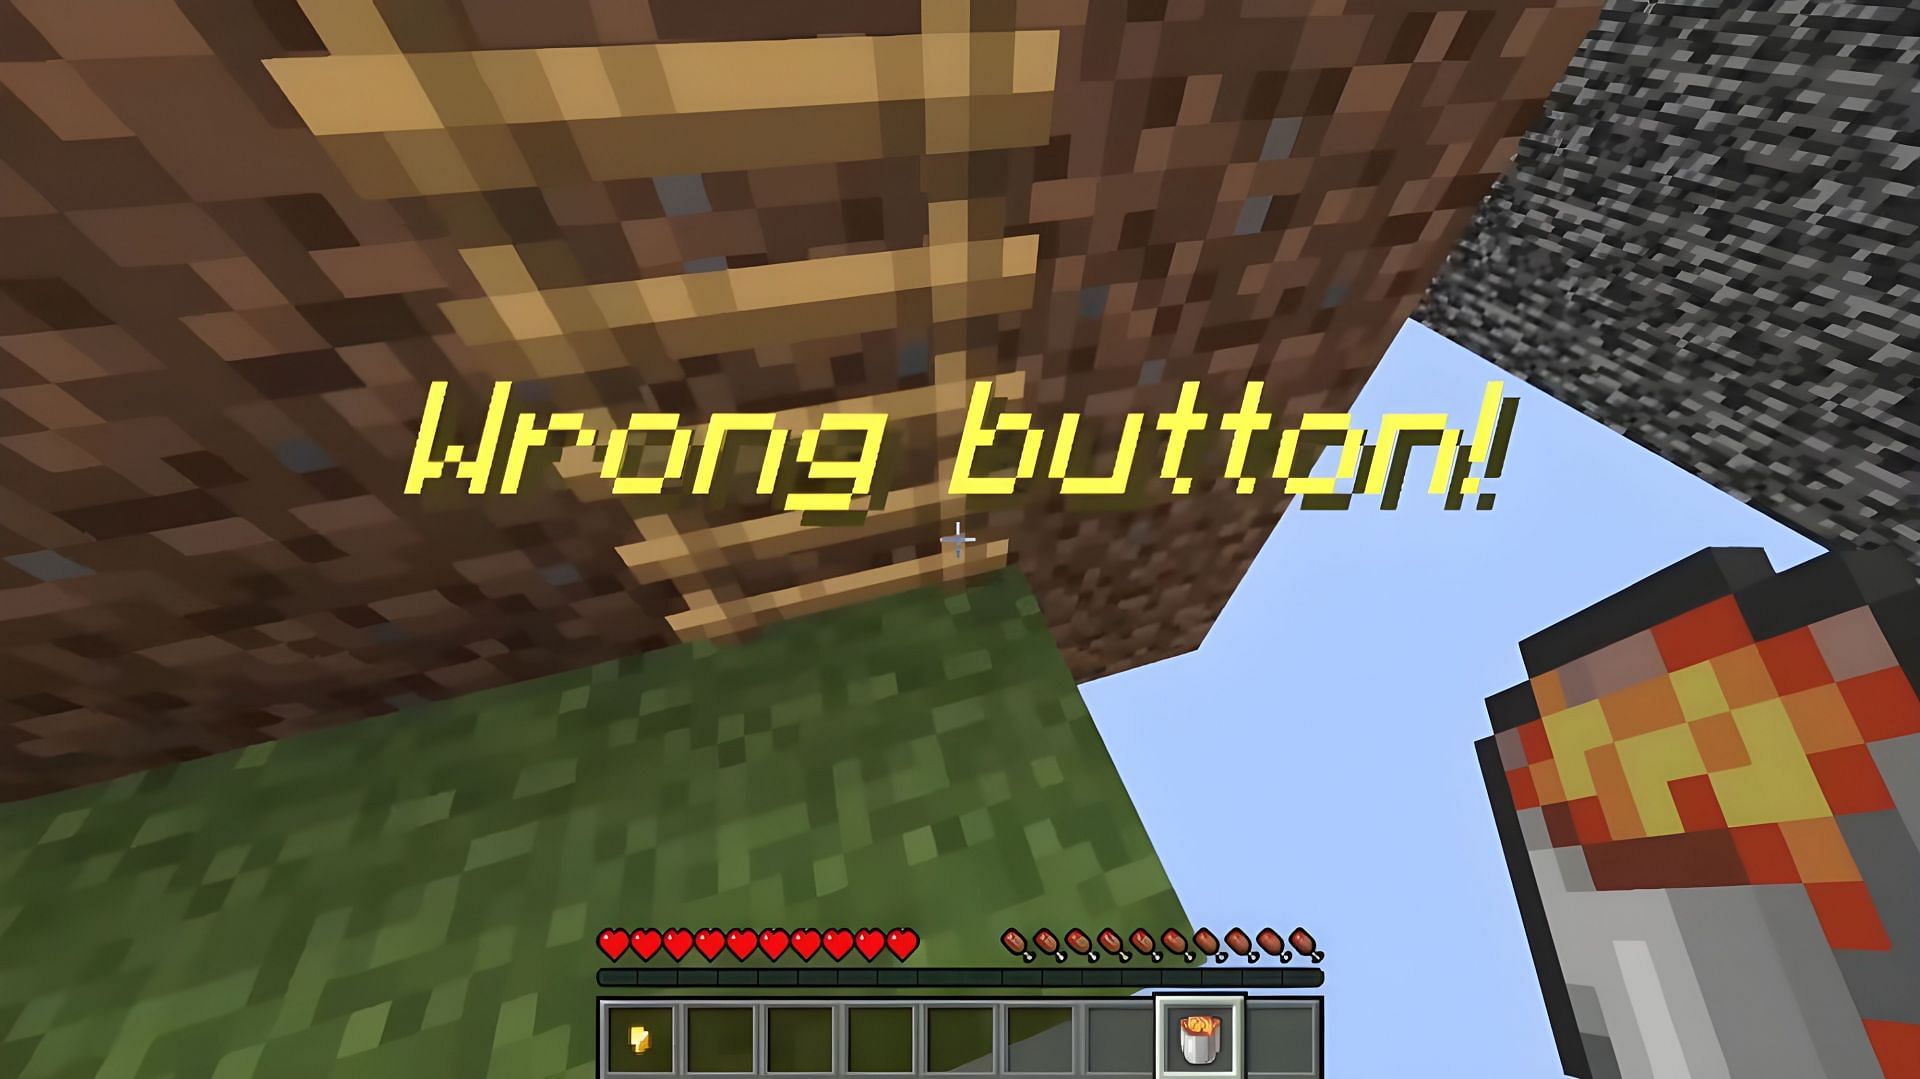 MoxMC is an incredible Find the Button server. (Image via Mojang)